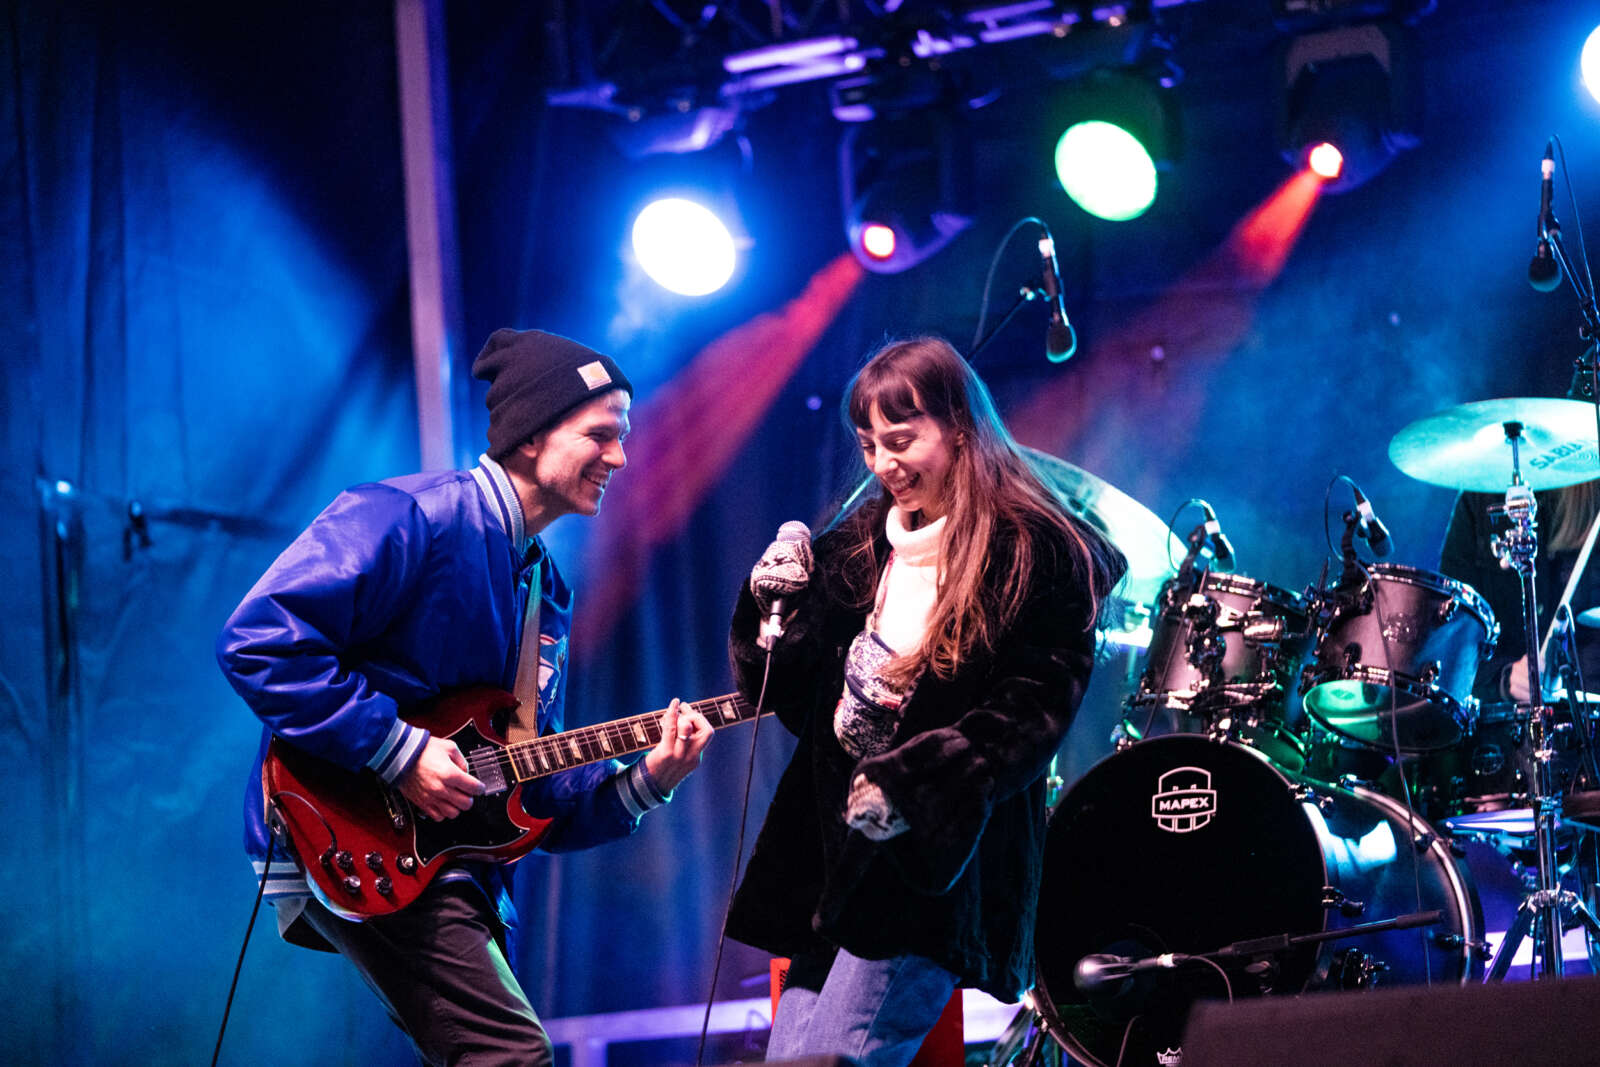 Man playing guitar and woman singing on stage outside with drumb set in background